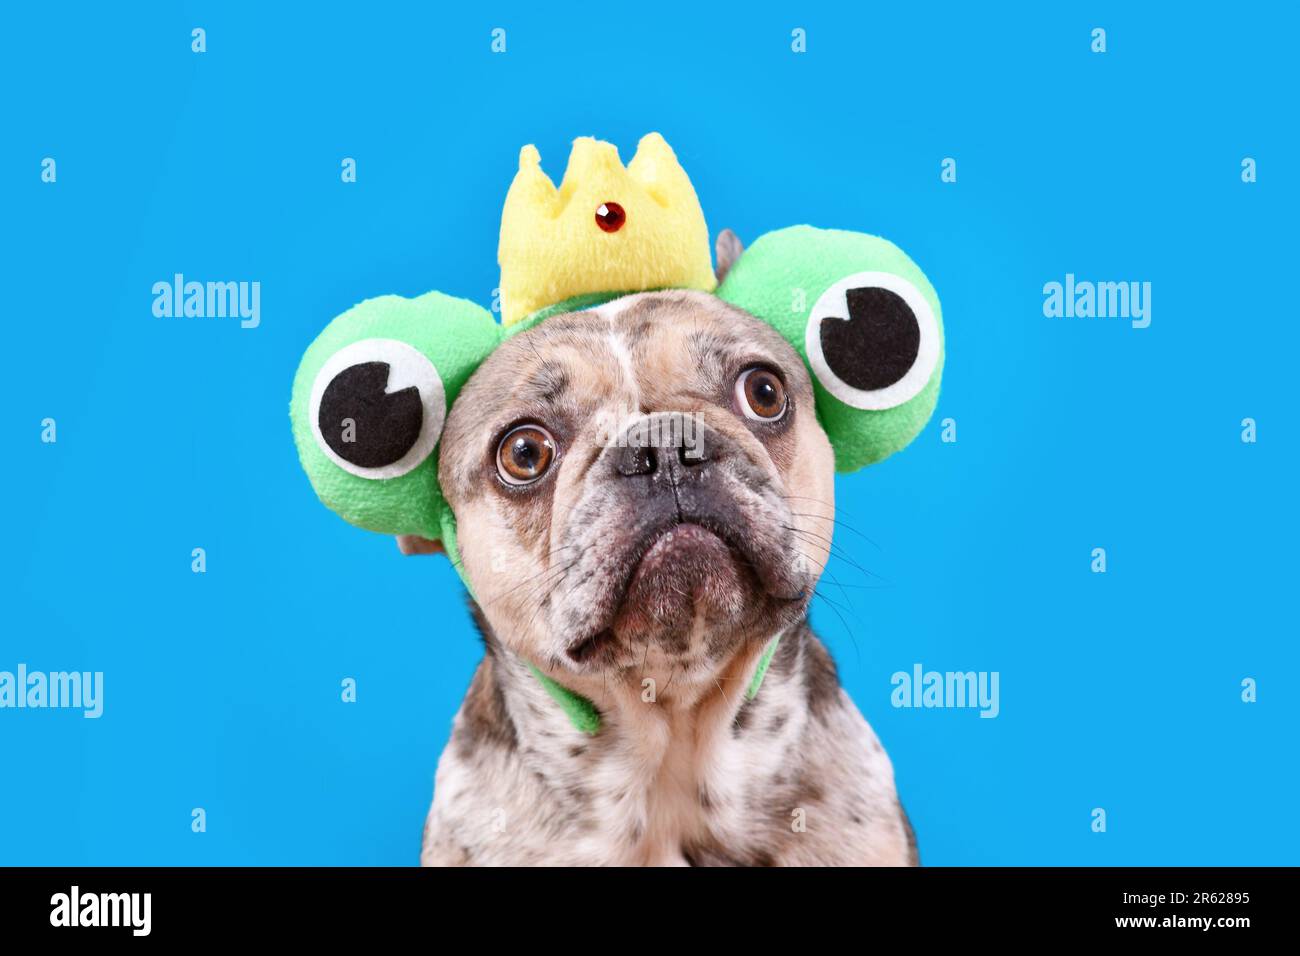 Funny French Bulldog dog with frog headband with crown and large eyes on blue background with copy space Stock Photo